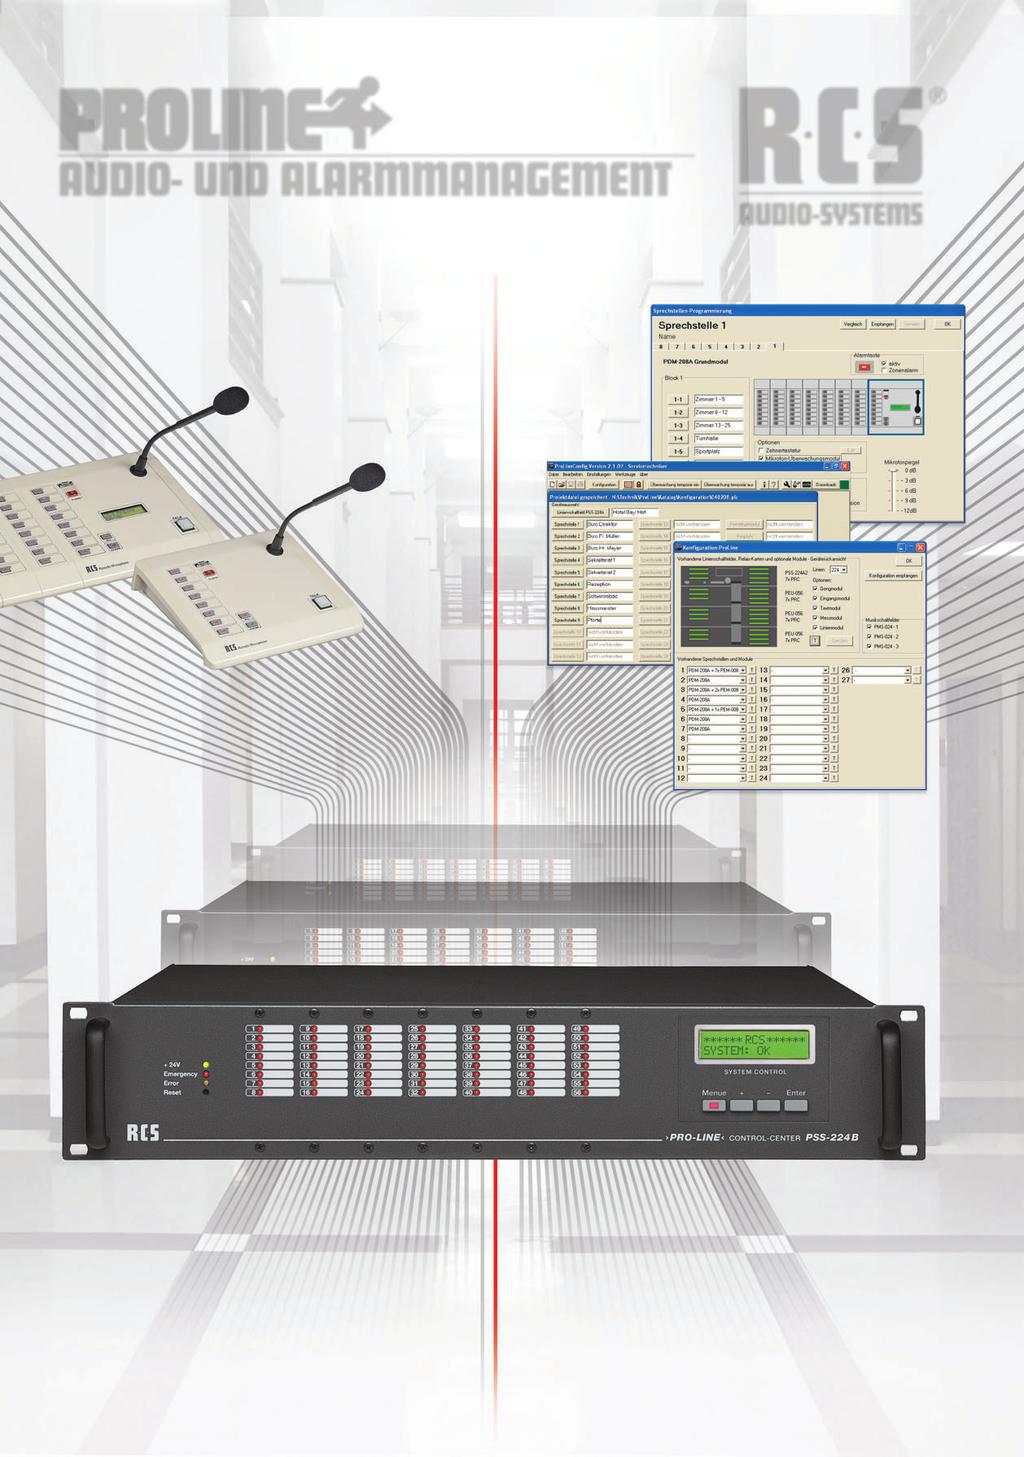 AUDIO- AND ALARMMANAGEMENT Modular expandable from 8 to 224 speaker lines Compliant to IEC 60849 Expandable in steps of 8 up to 224